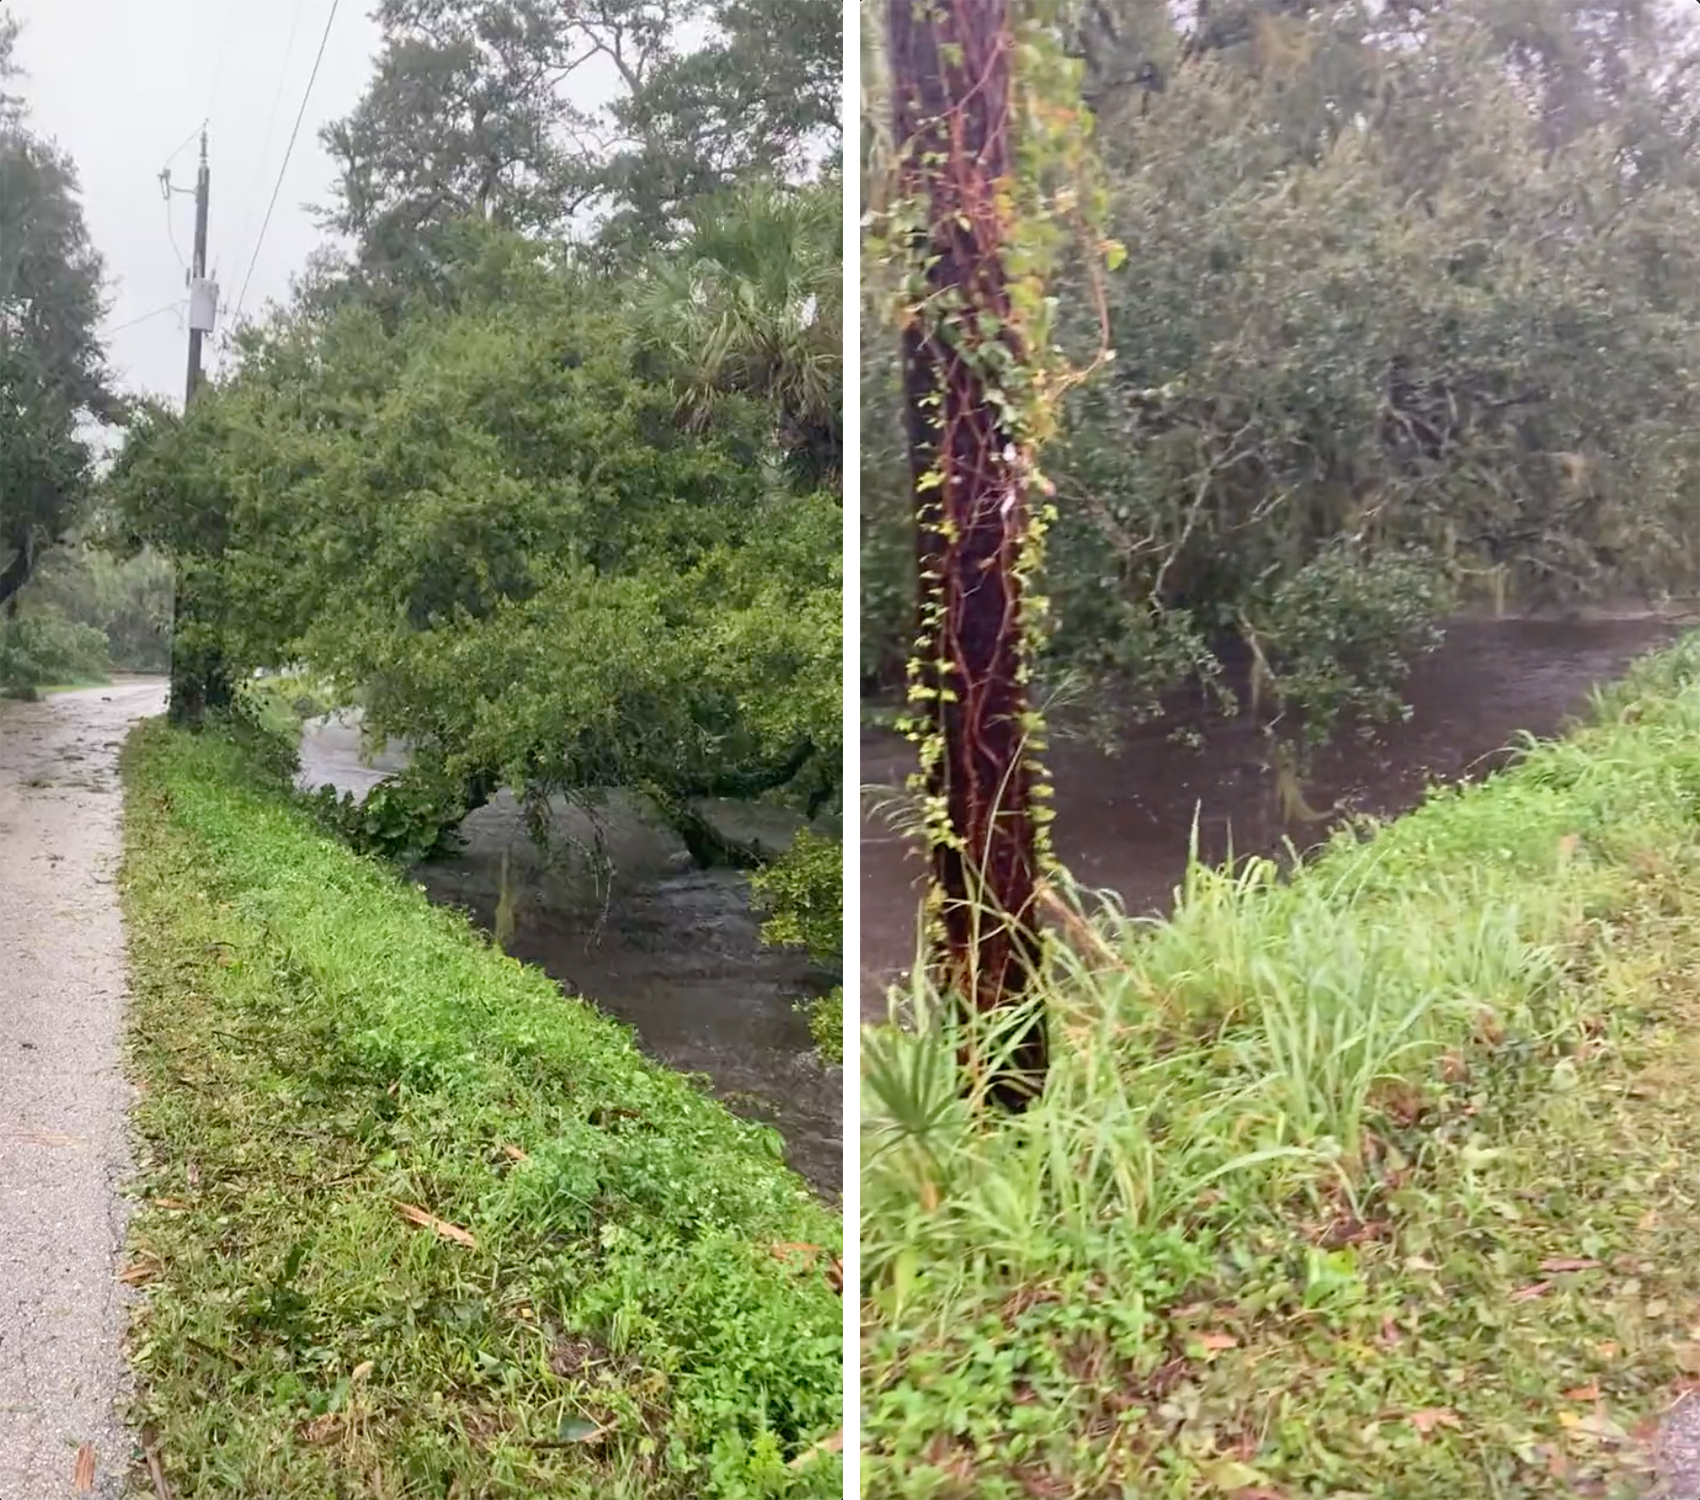 Waters of Whitaker Bayou in Sarasota are seen rising quickly as Hurricane Ian passes over the region early evening Wednesday. (From video via Justin Schwegel)